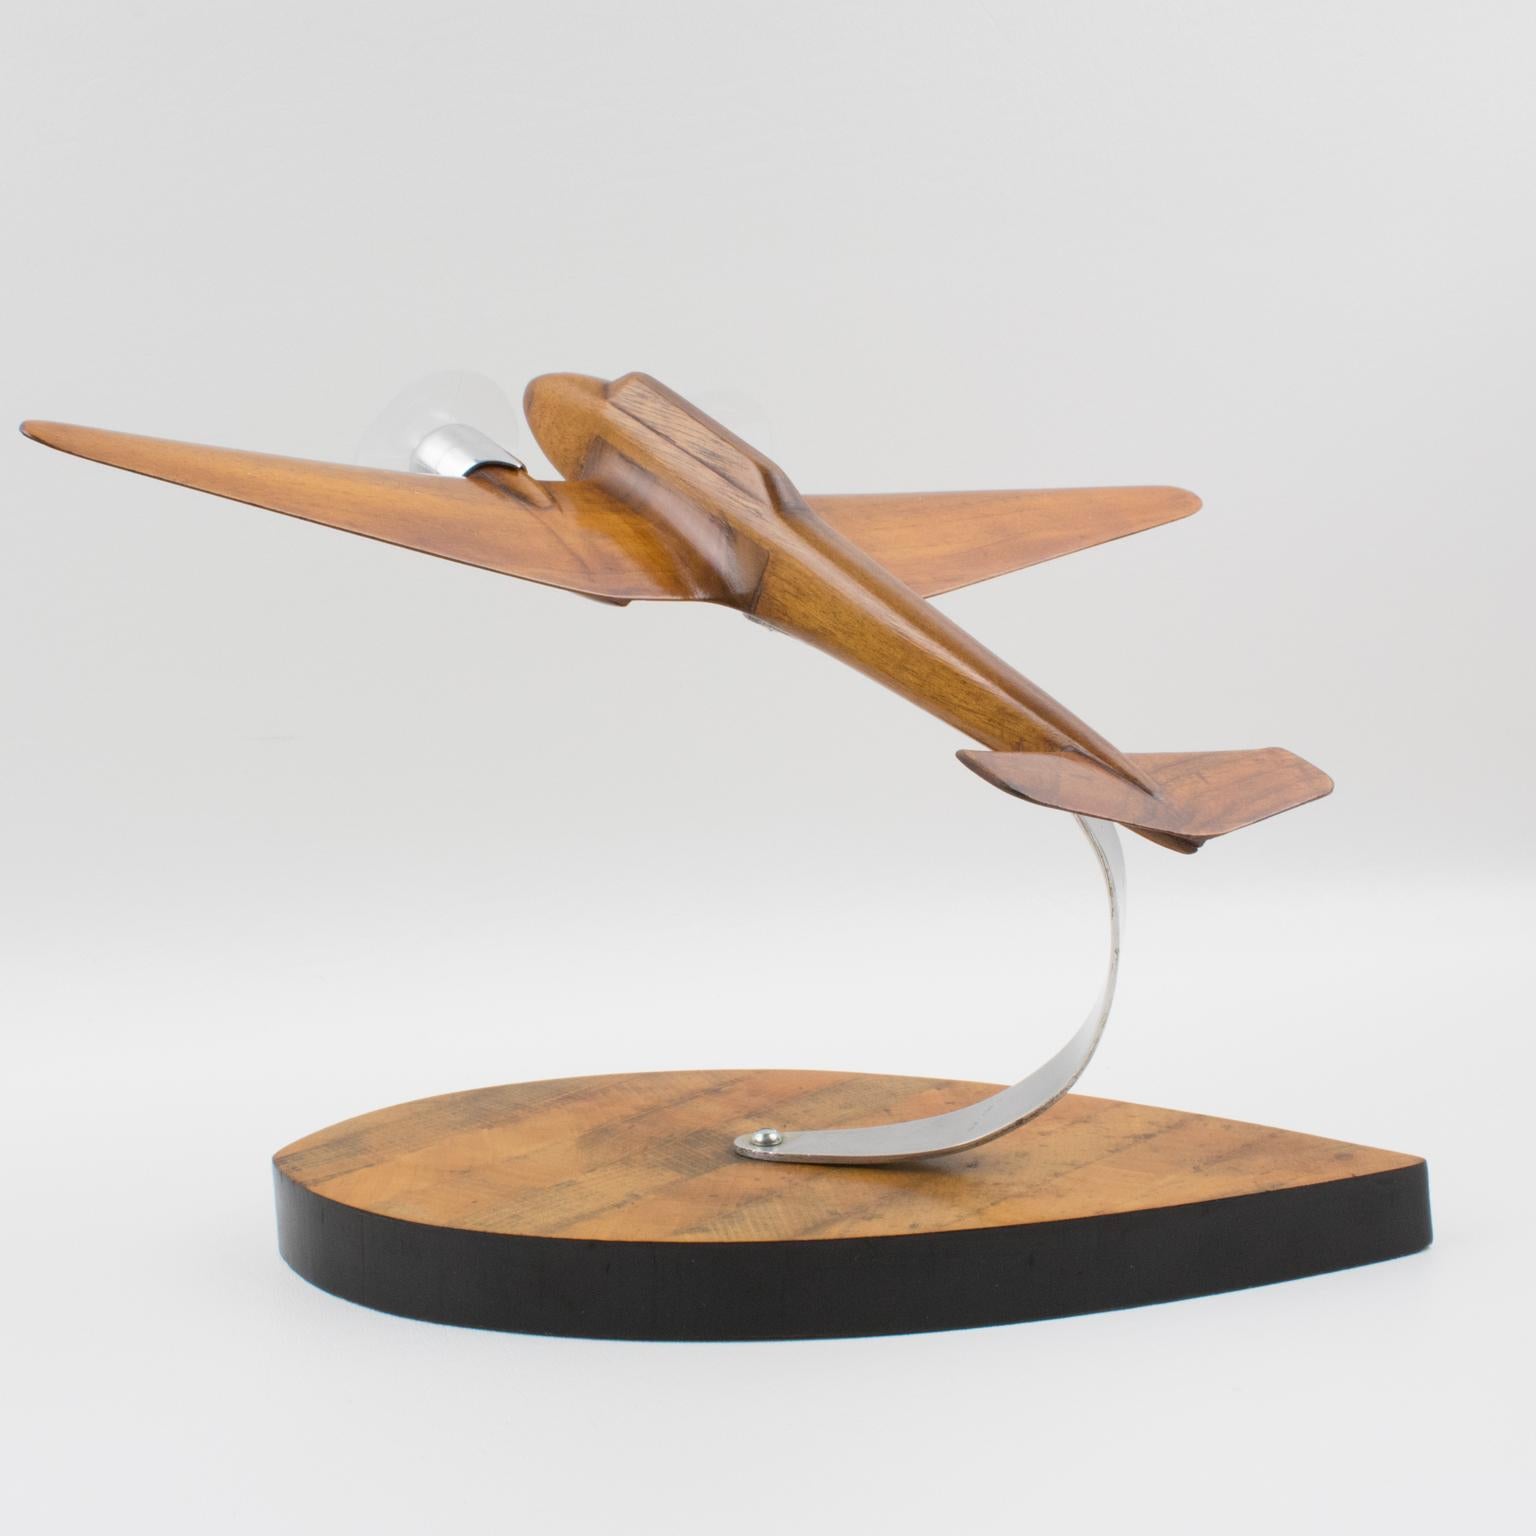 French Art Deco, 1940s Wooden and Aluminum Airplane Aviation Model 7